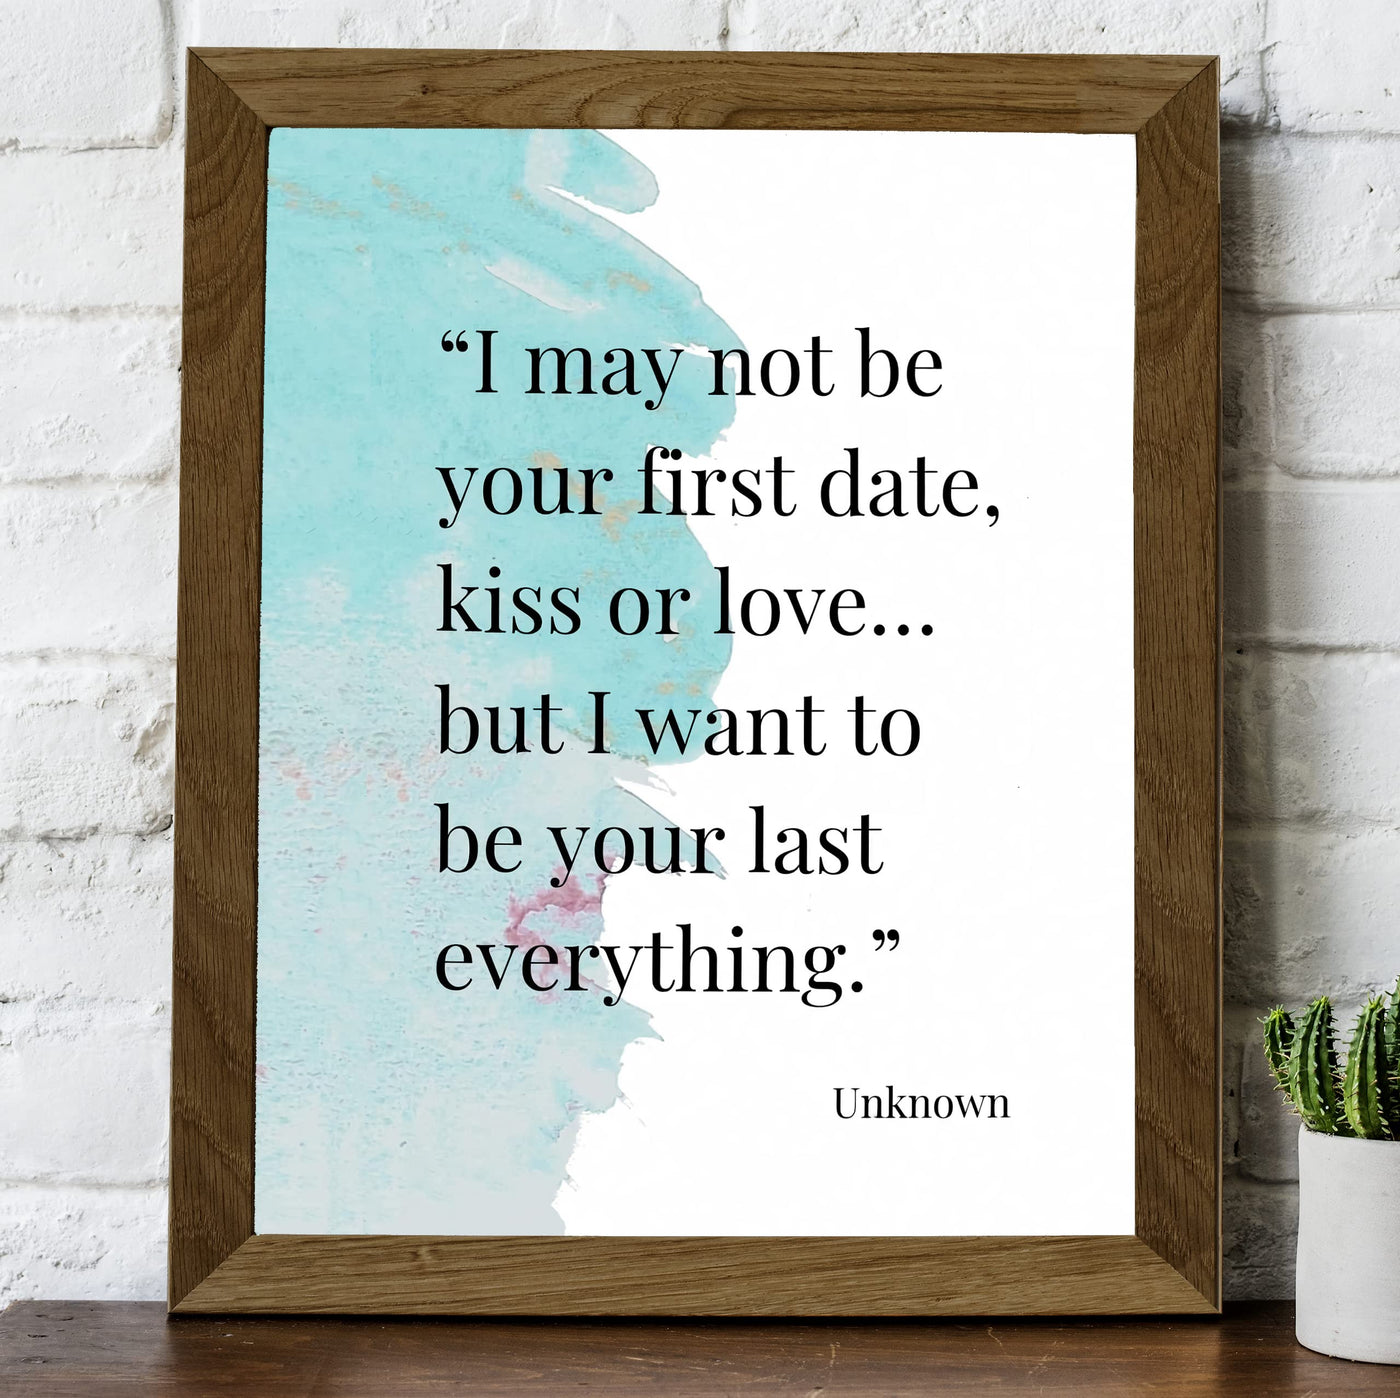 I Want To Be Your Last Everything Inspirational Love Quotes Wall Art-8x10" Rustic Watercolor Design Print-Ready to Frame. Romantic Decor for Home-Bedroom-Wedding-Engagement. Great Gift for Couples!